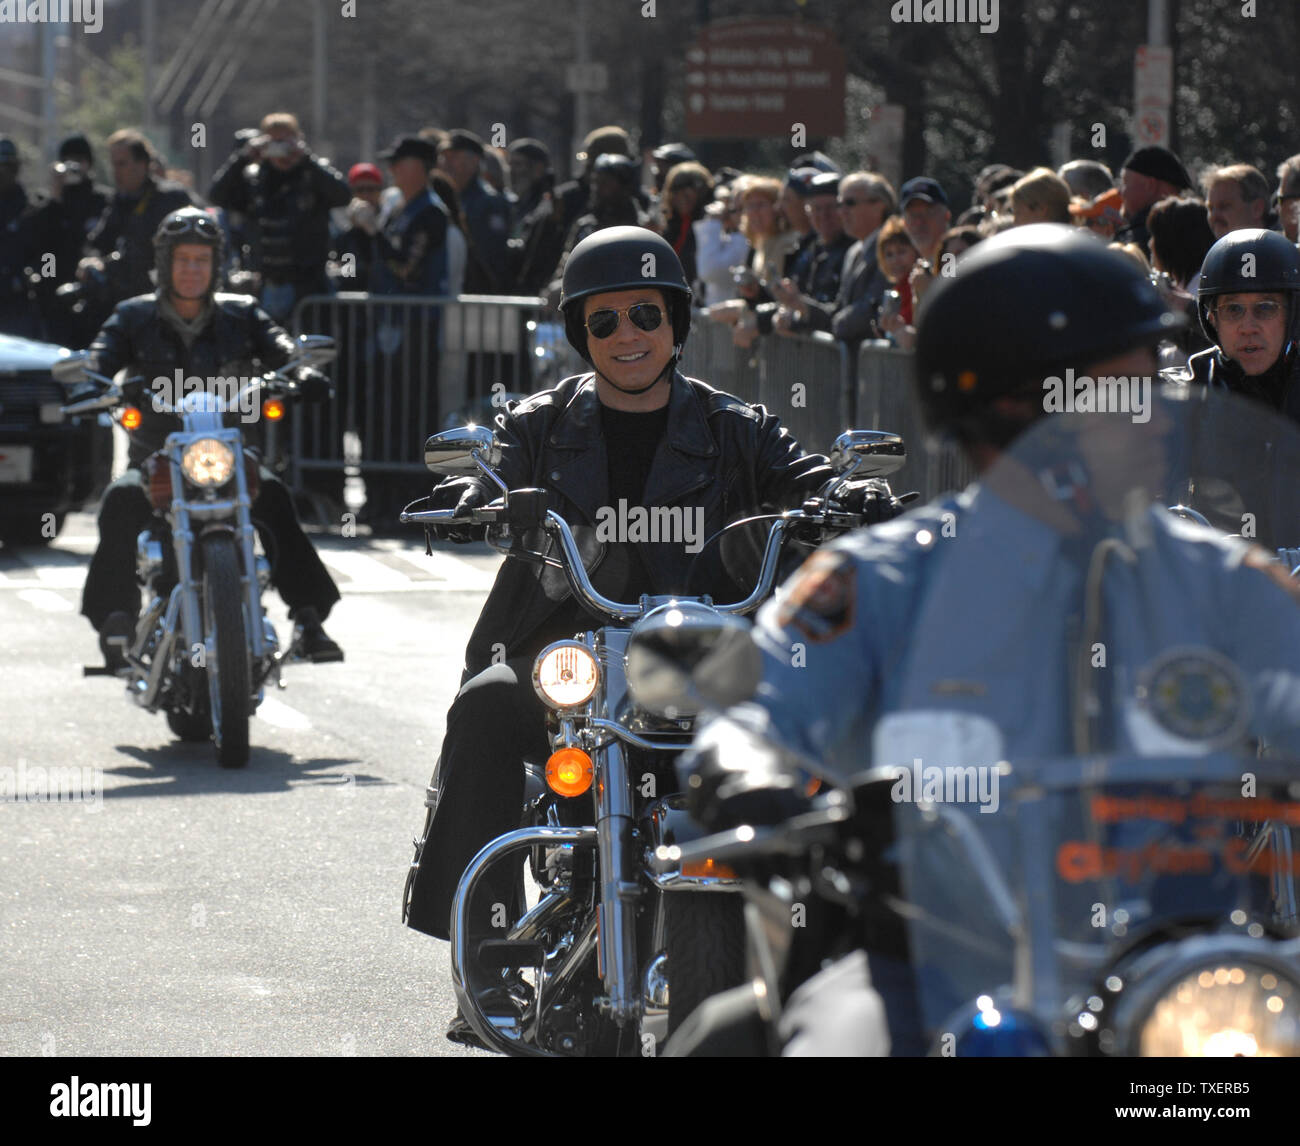 'Wild Hogs' stars John Travolta (C) and Tim Allen ride behind a Georgia State Patrol officer at the Georgia State Capitol on February 6, 2007. The actor promoted a motorcycle safety program and their upcoming comedy film. (UPI Photo/John Dickerson) Stock Photo